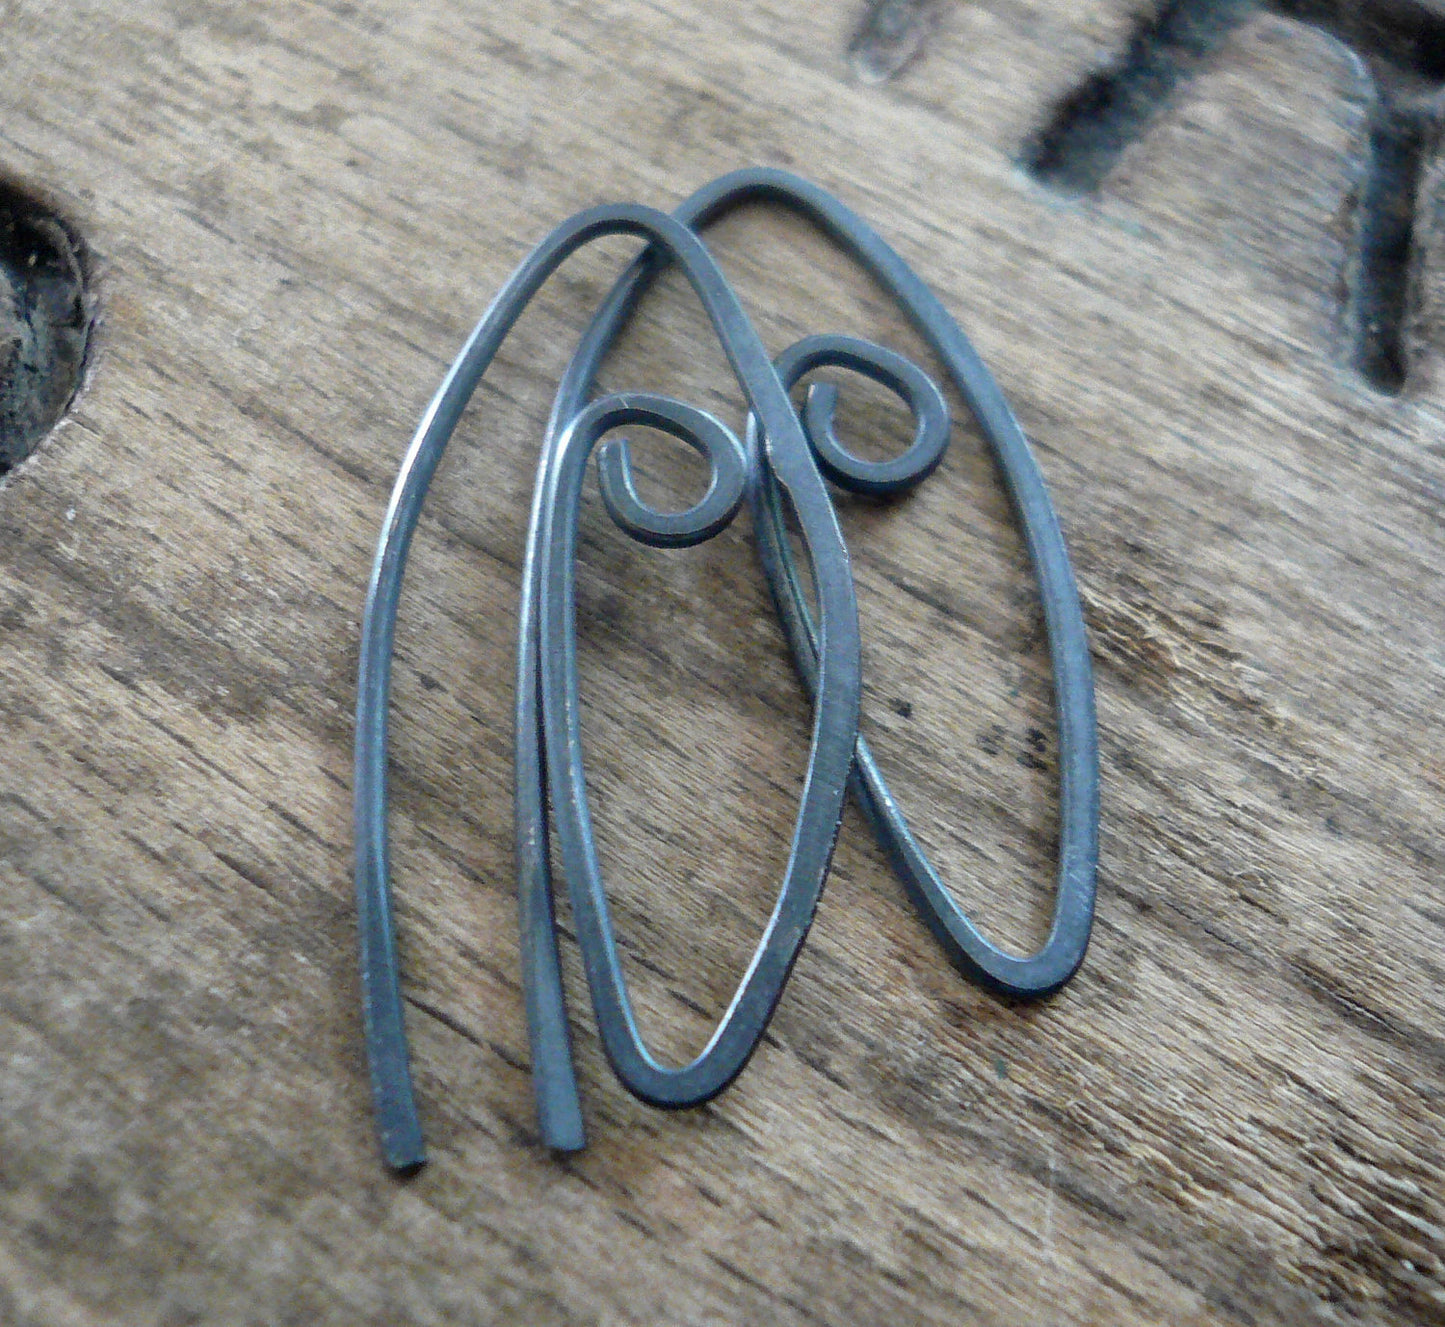 12 Pairs of my Furl Sterling Silver Earwires - Handmade. Handforged. Heavily Oxidized